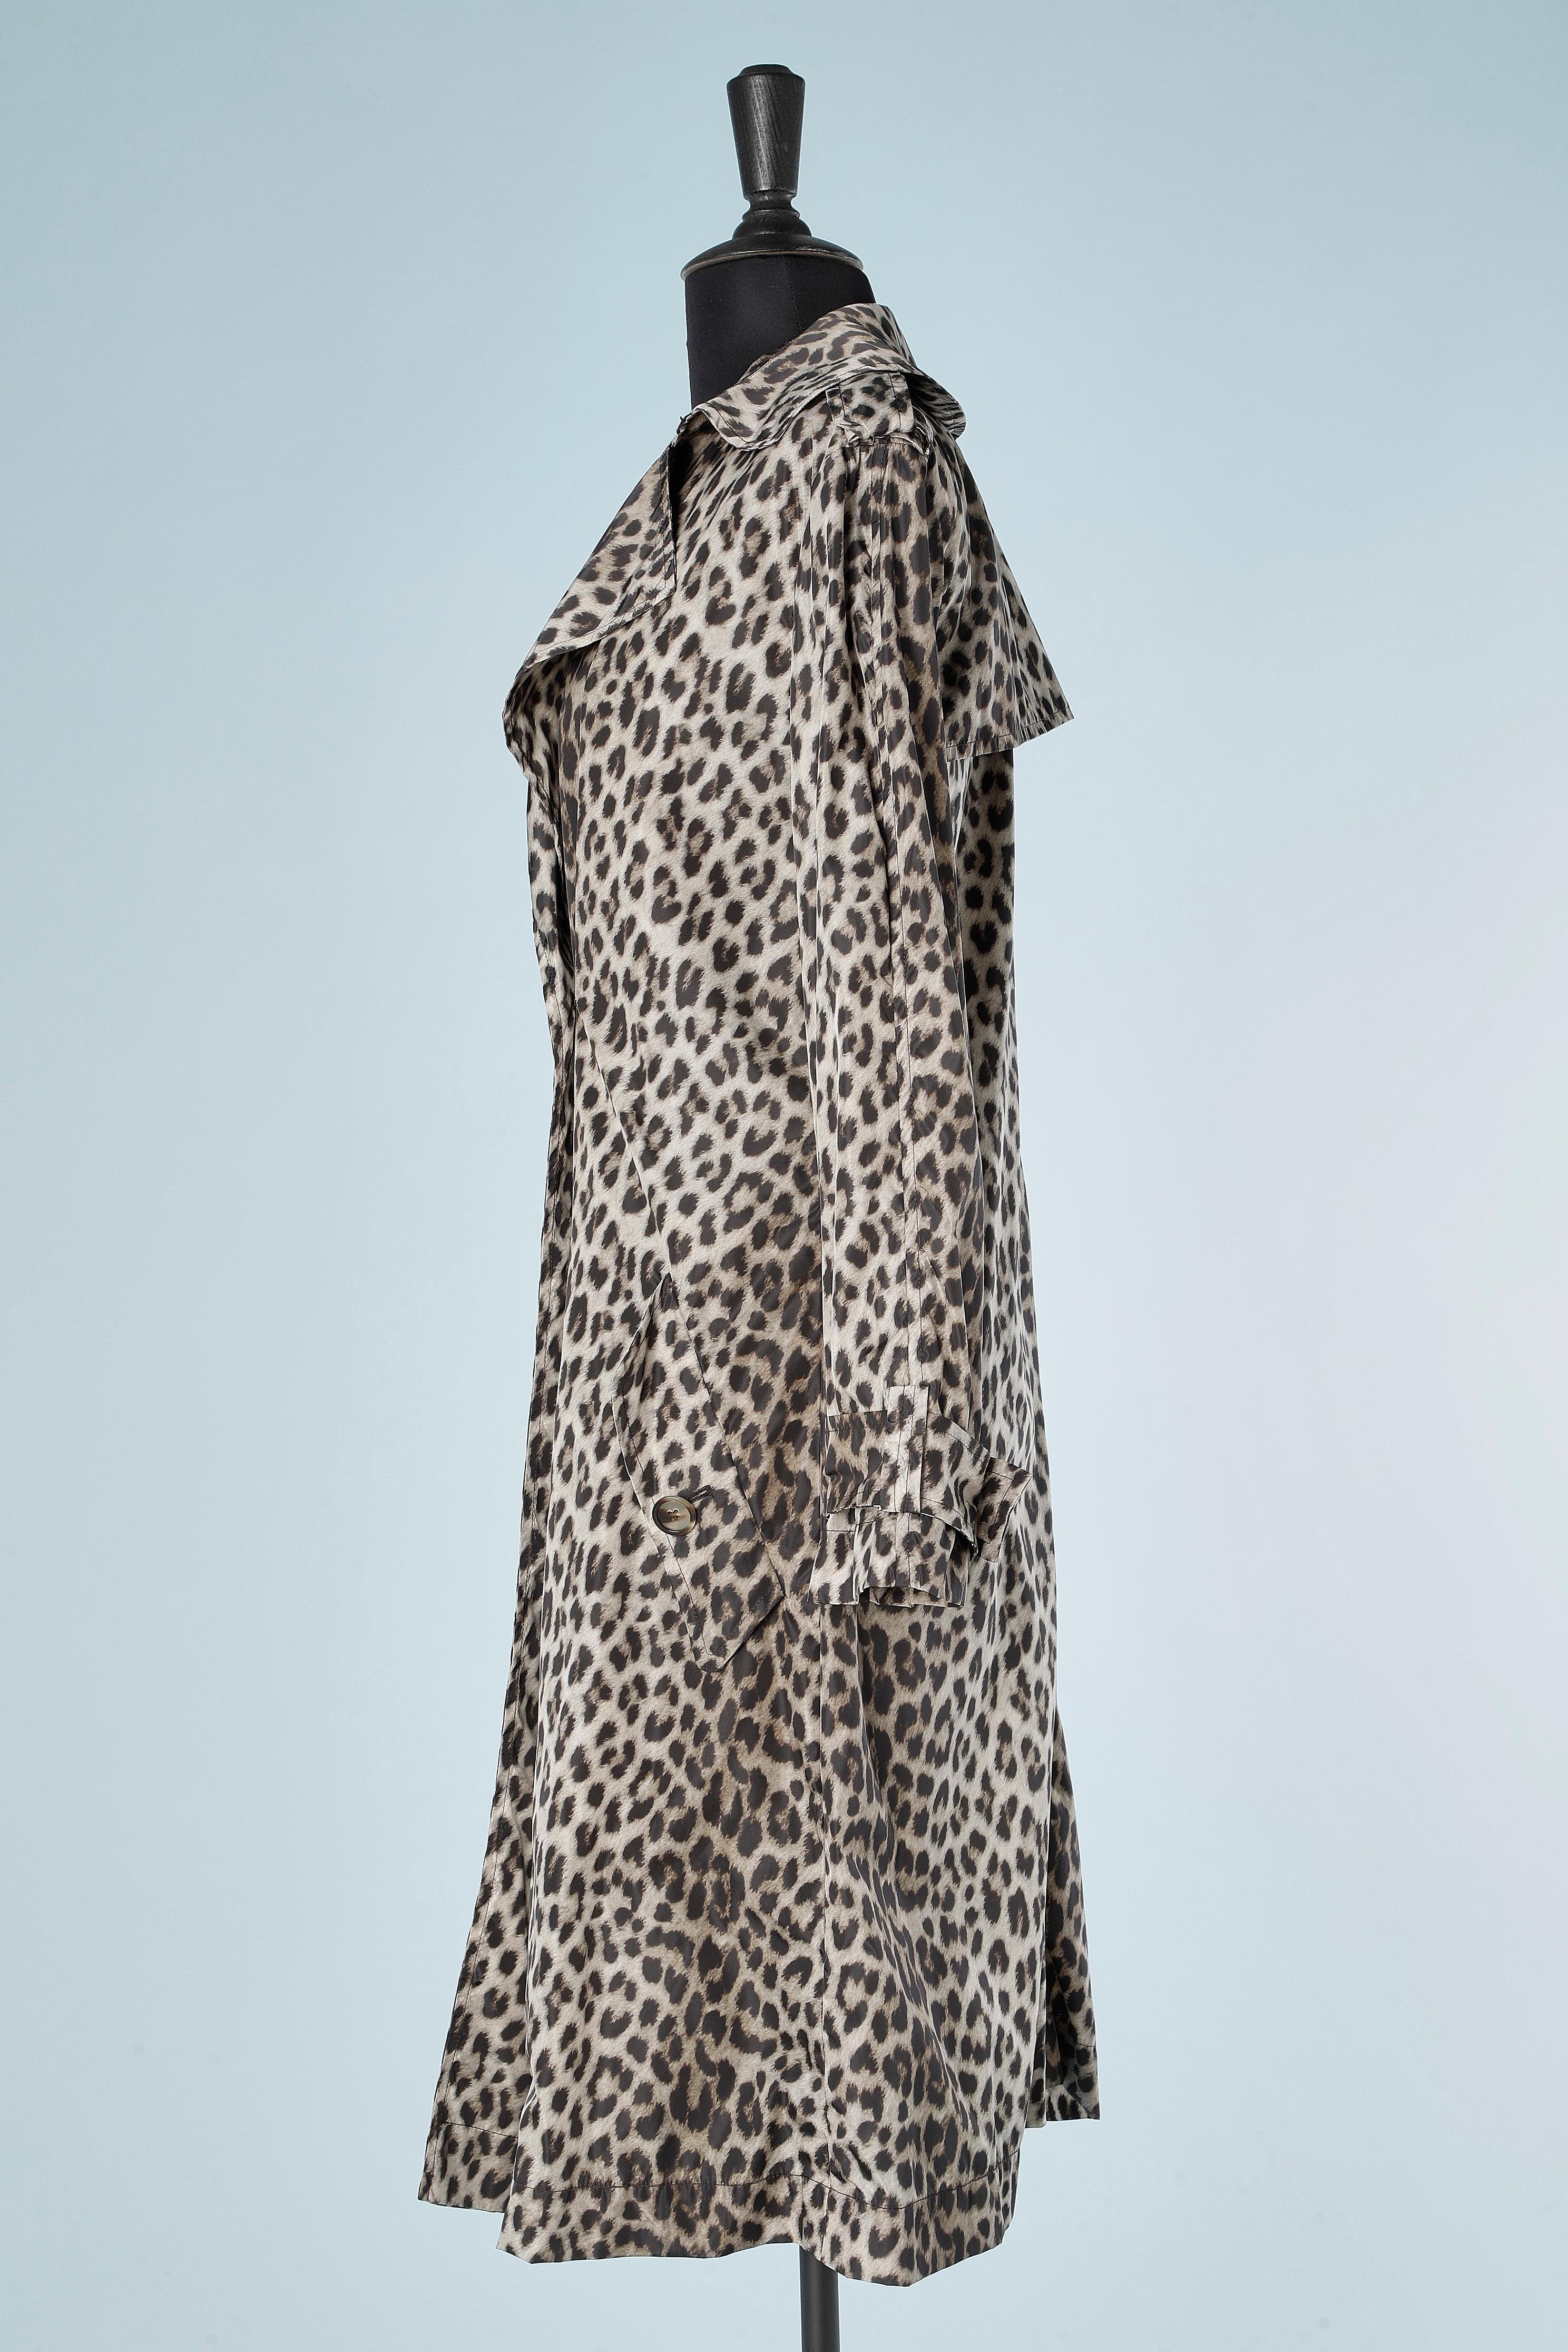 Nylon leopard printed double-breasted trench-coat Lanvin by Alber Elbaz 2010 1